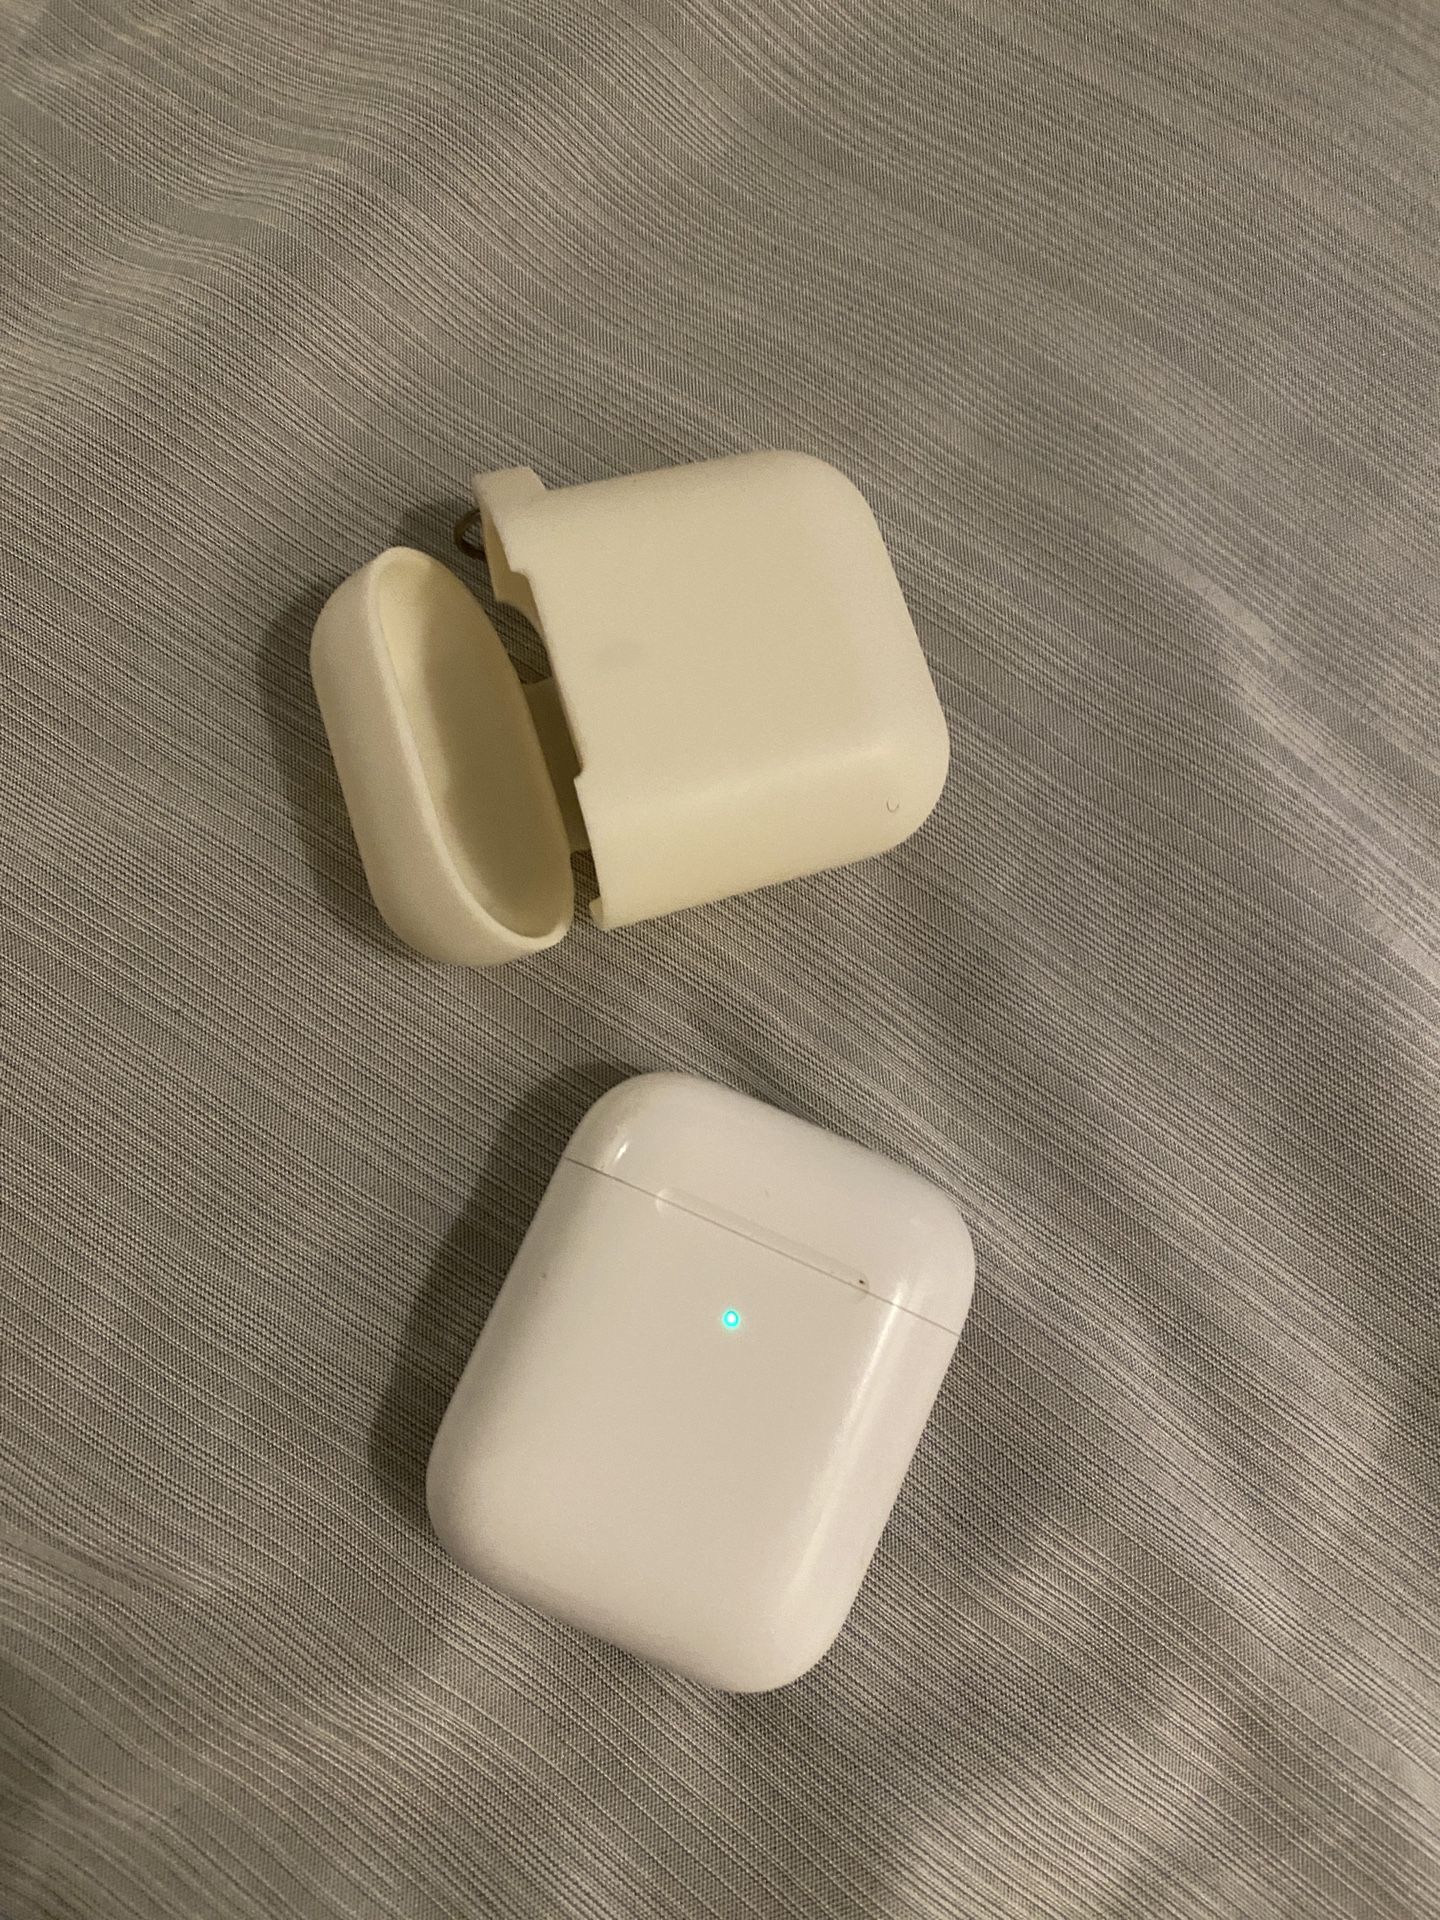 Apple Airpods 2nd Generation With Case